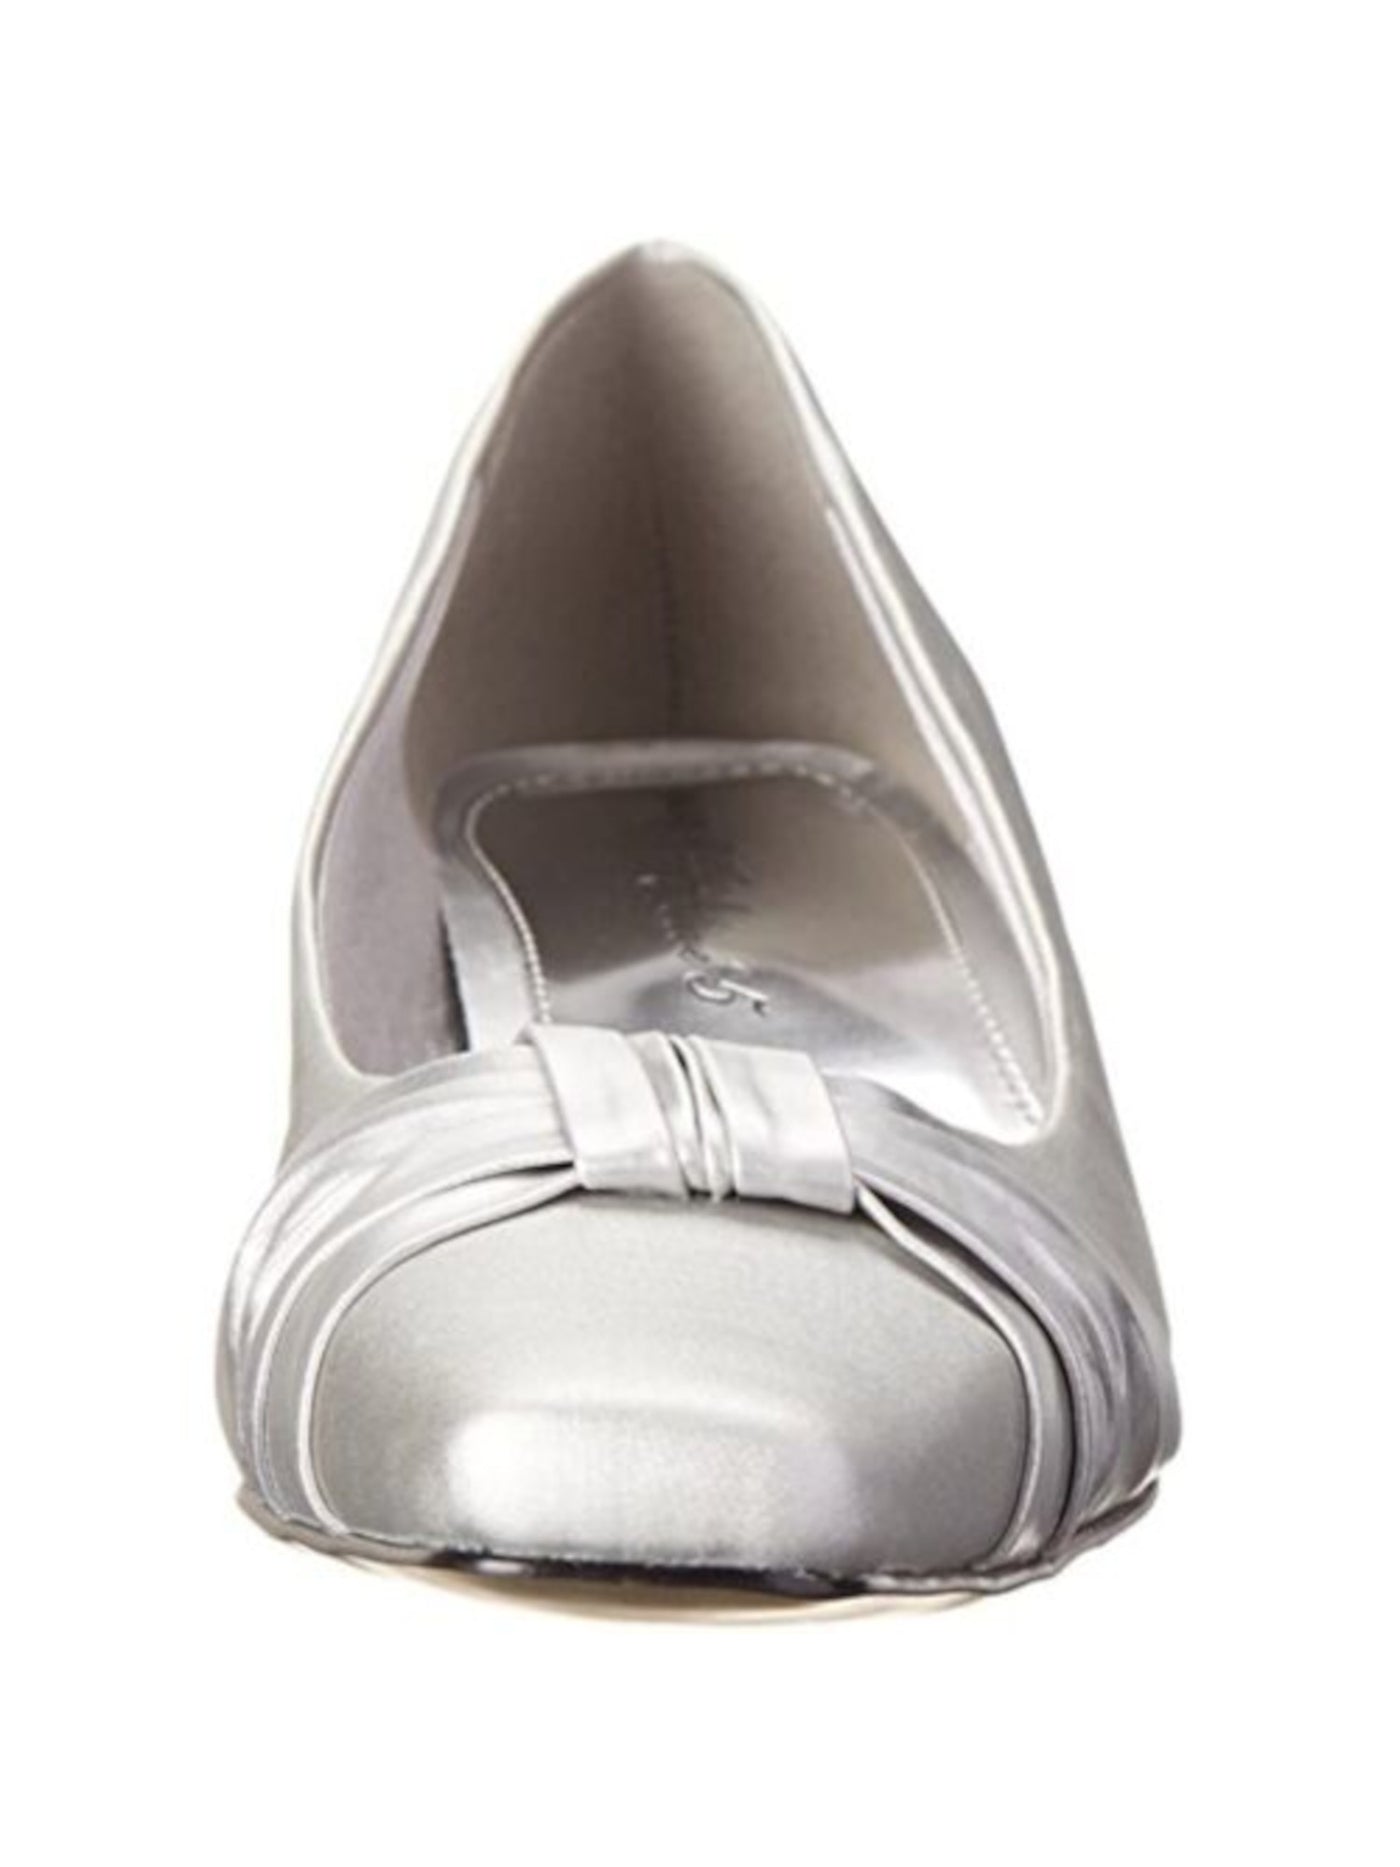 EASY STREET ALIVE AT 5 Womens Silver Bow Accent Padded Waive Square Toe Flare Slip On Pumps Shoes 8 M